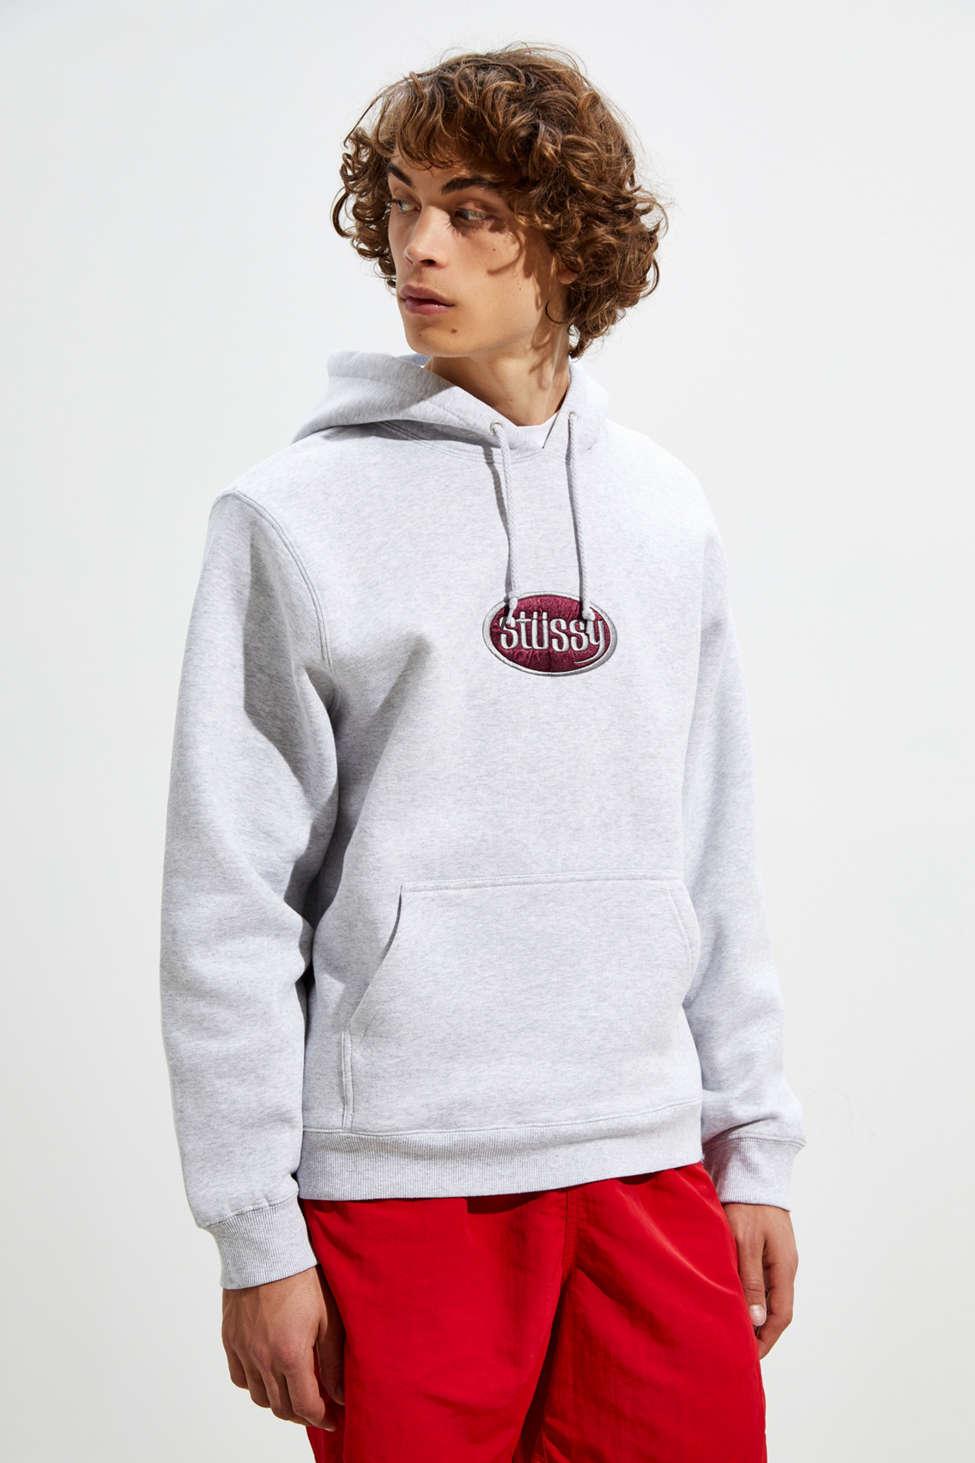 Stussy Cotton Embroidered Oval Logo Hoodie Sweatshirt in Grey 